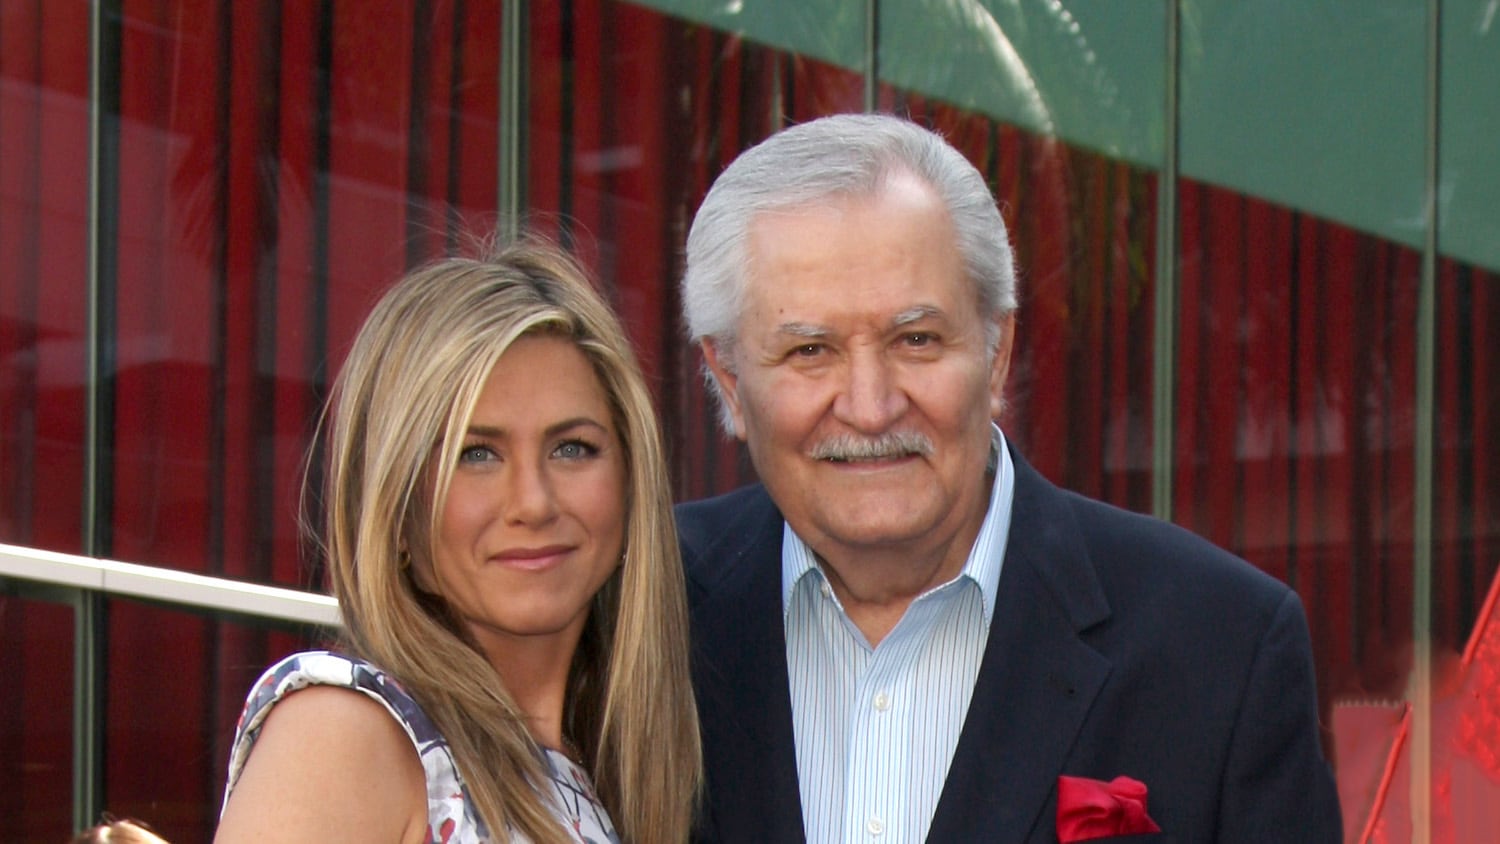 John Aniston, ‘Days of Our Lives' Star & Jennifer Aniston's Father, Dies At 89